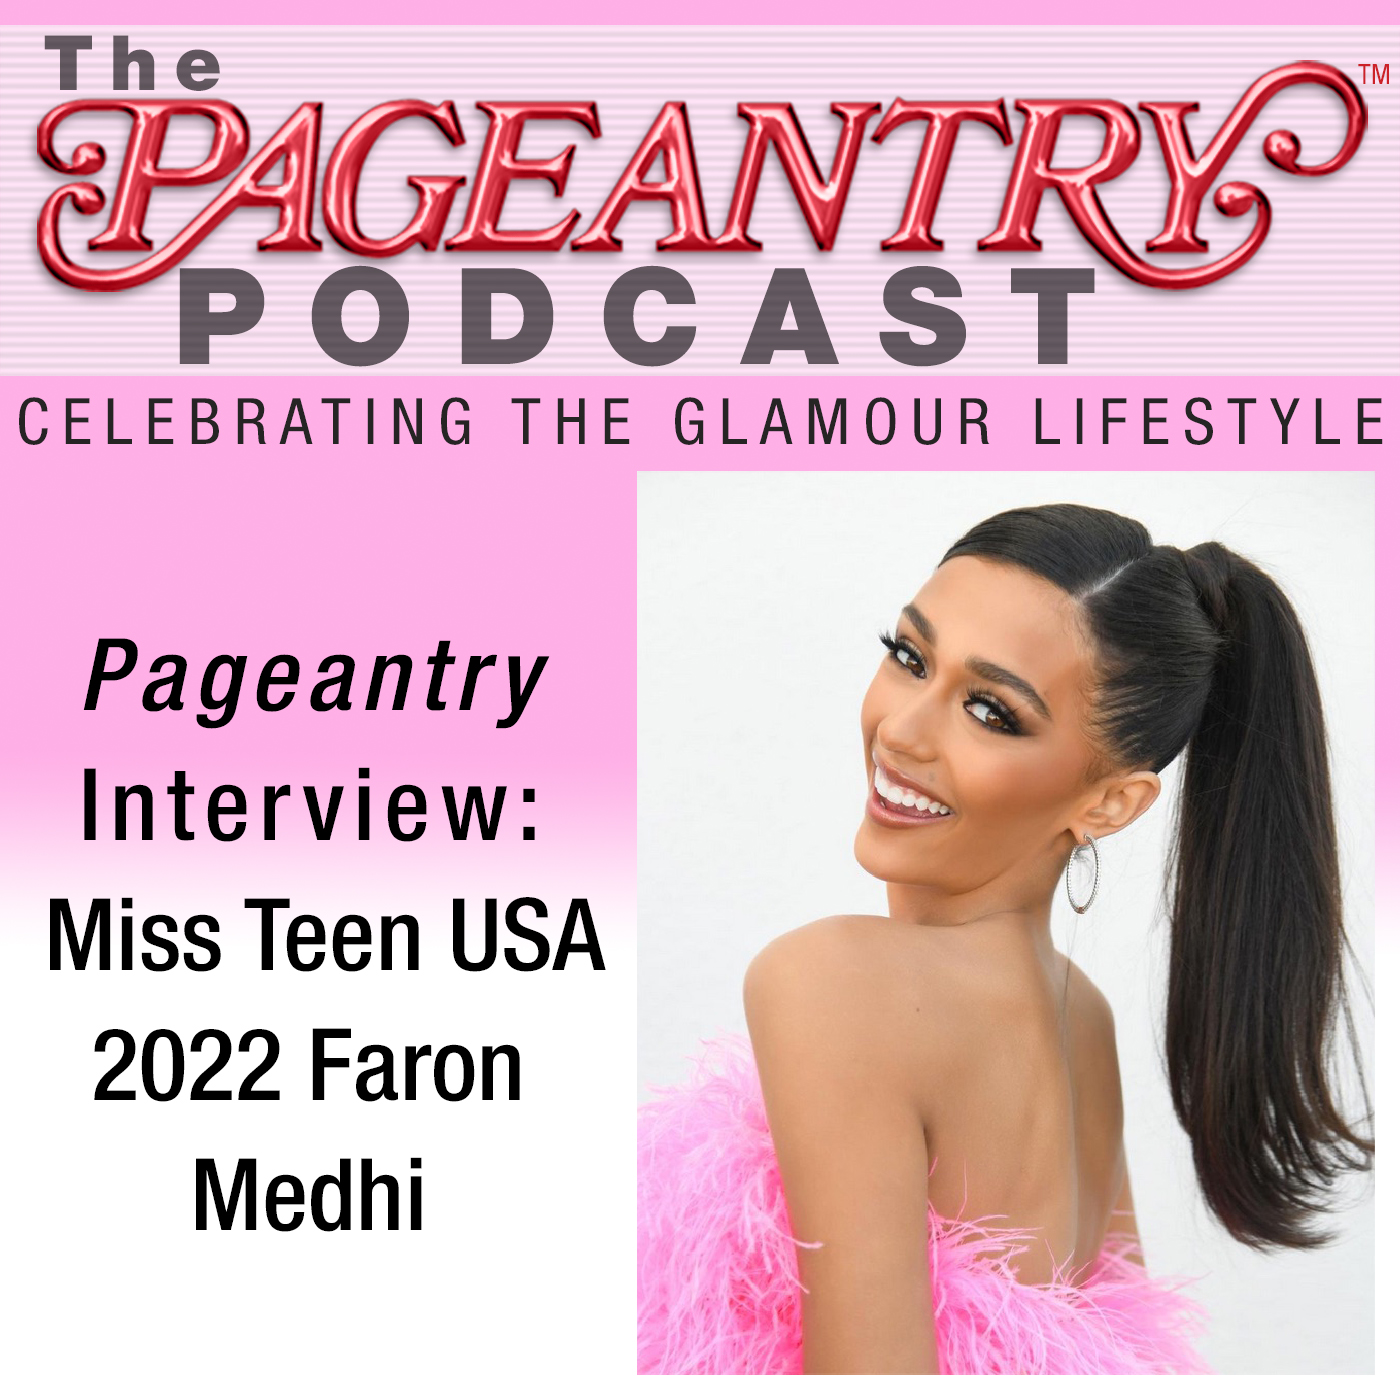 miss teen usa 2022, miss teen usa, teen usa, pageantry magazine, beauty pageant, pageant interview, faron medhi, national pageant, beauty, model, pageantry, pageant p[odcast, pageantry podcast